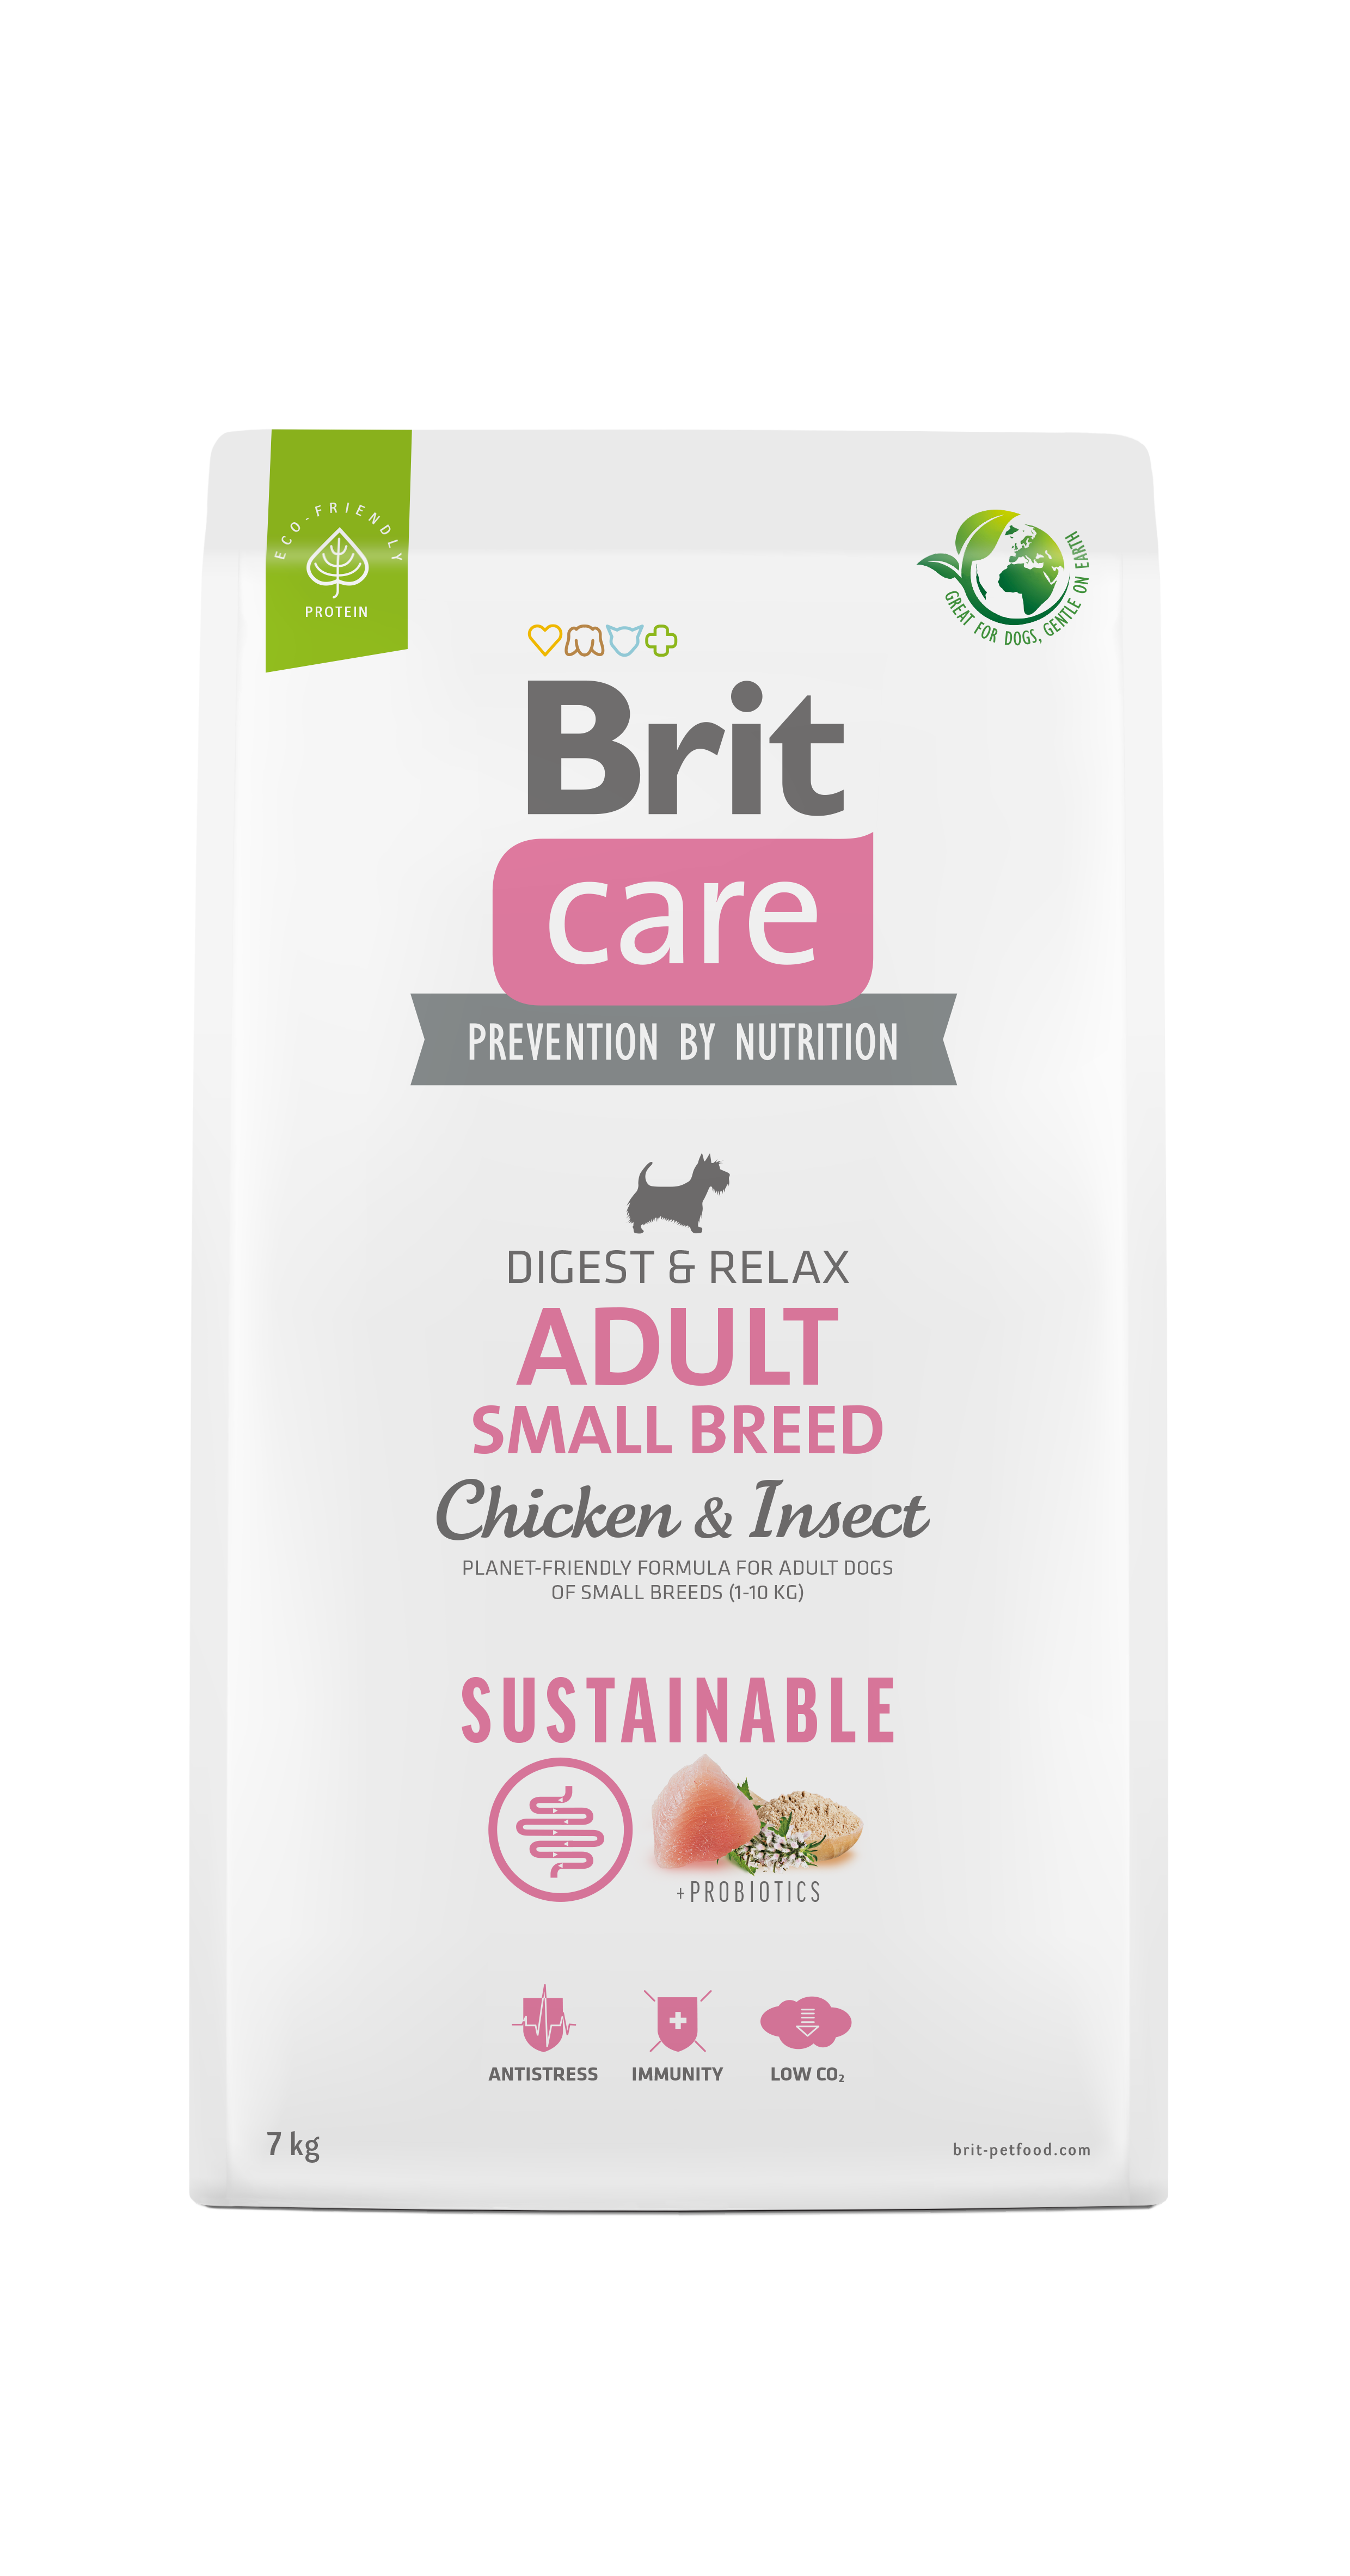 Brit Care Dog Sustainable Adult Small Breed 1 kg